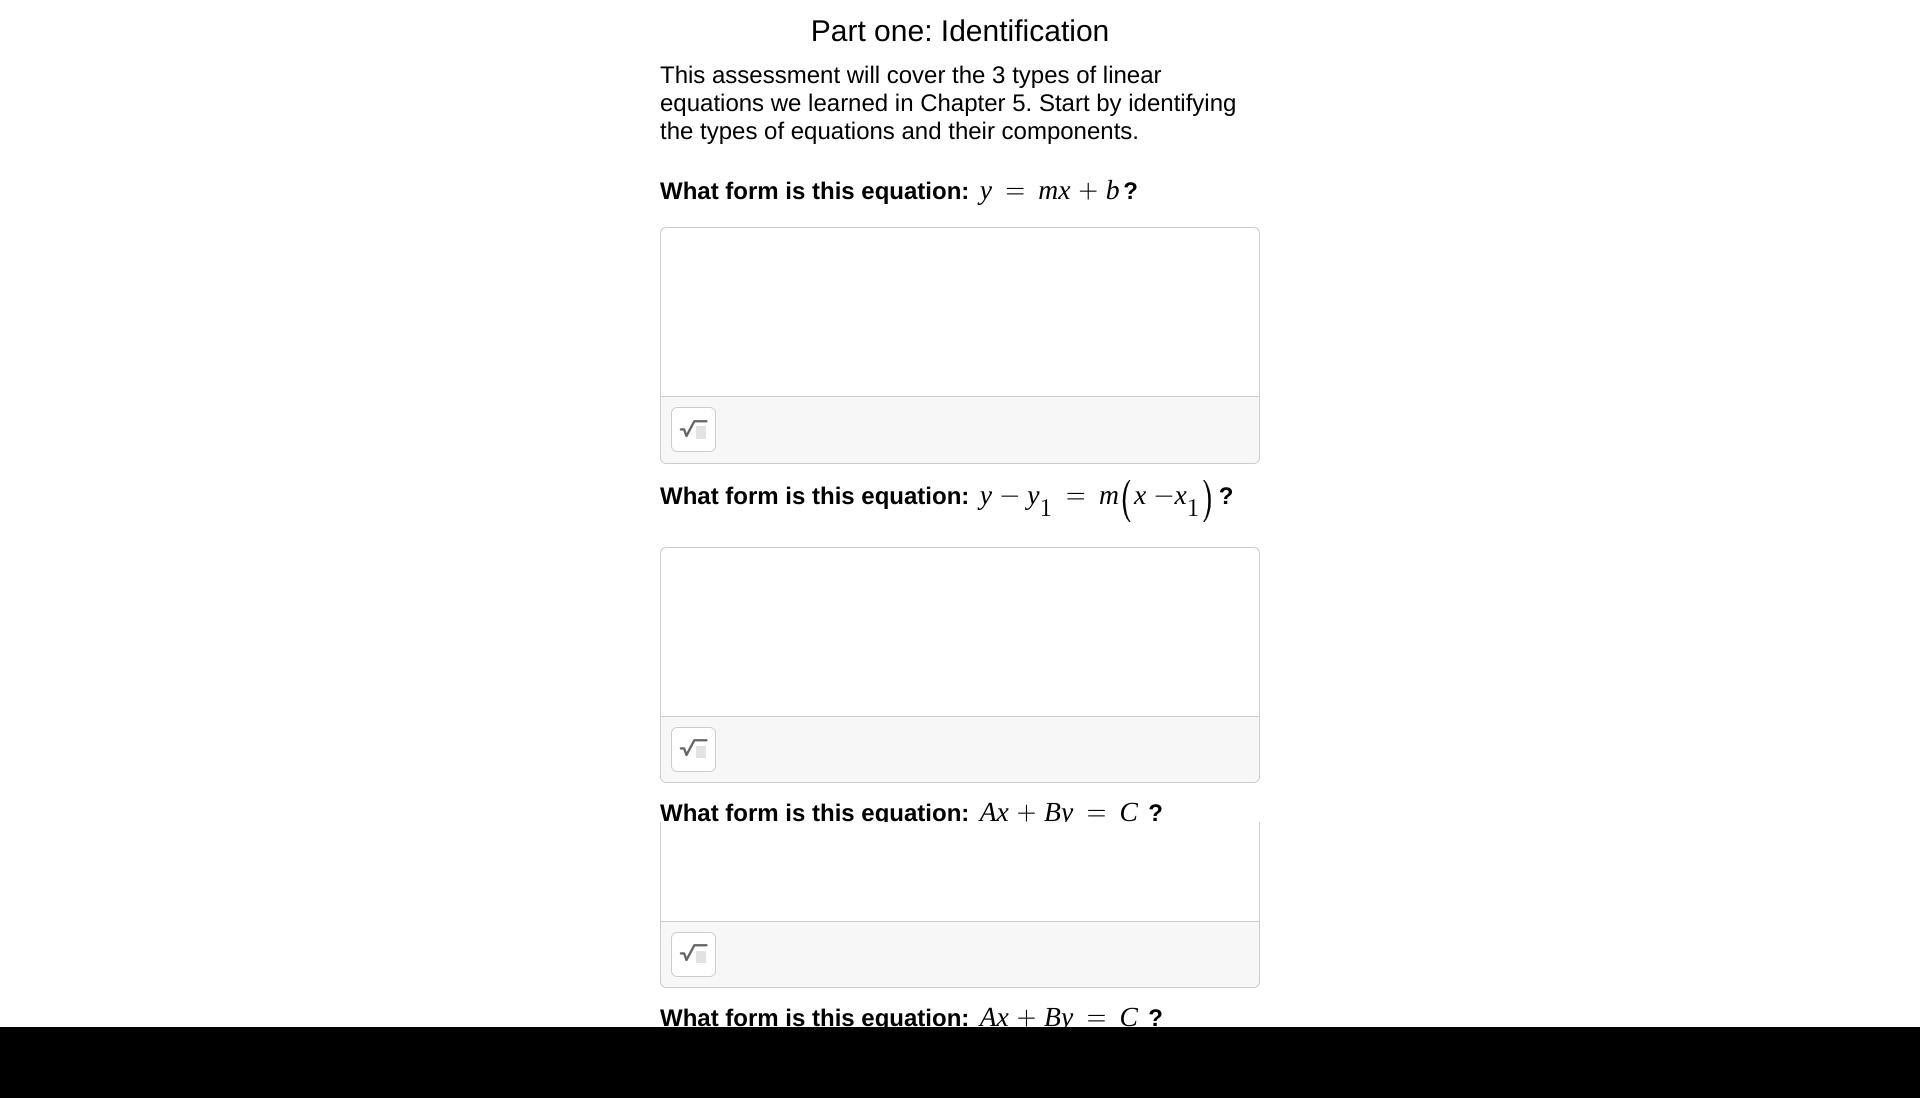 Part One: IdentificationThis Assessment Will Cover The 3 Types Of Linear Equations We Learned In Chapter